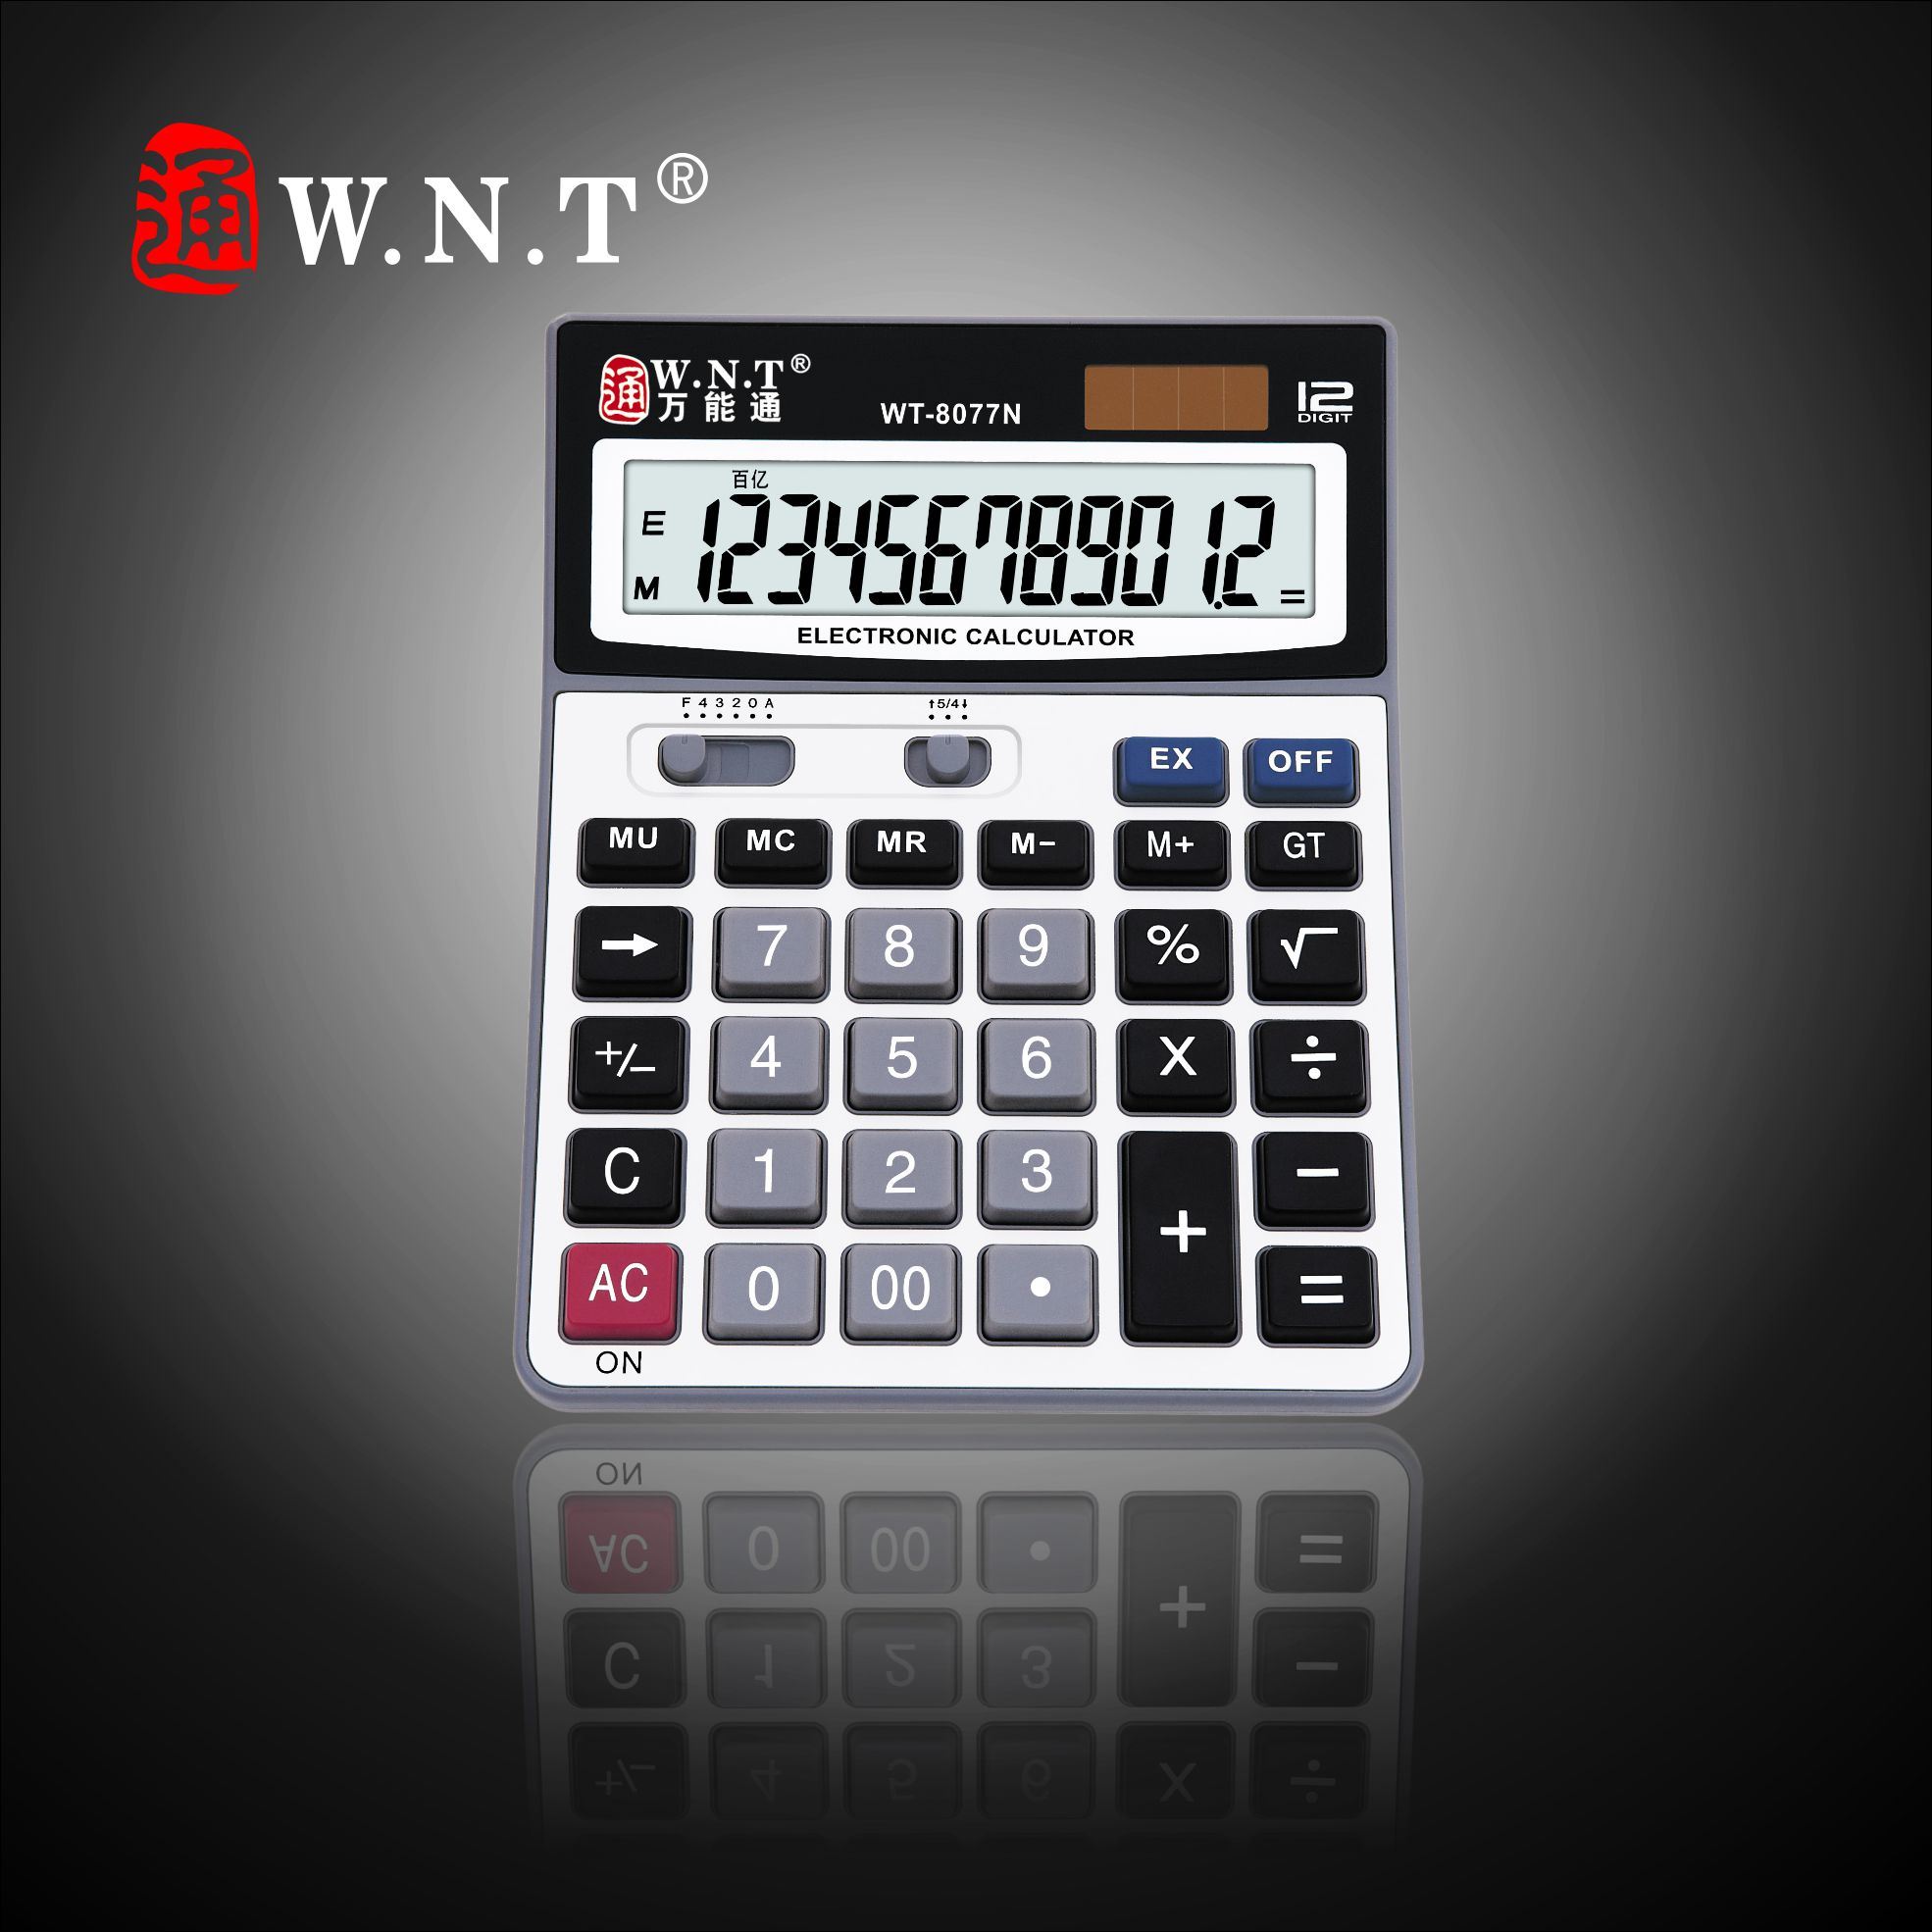 12 Digits Dual Solar Power Desktop Finance Calculator with Business, Sales or Office